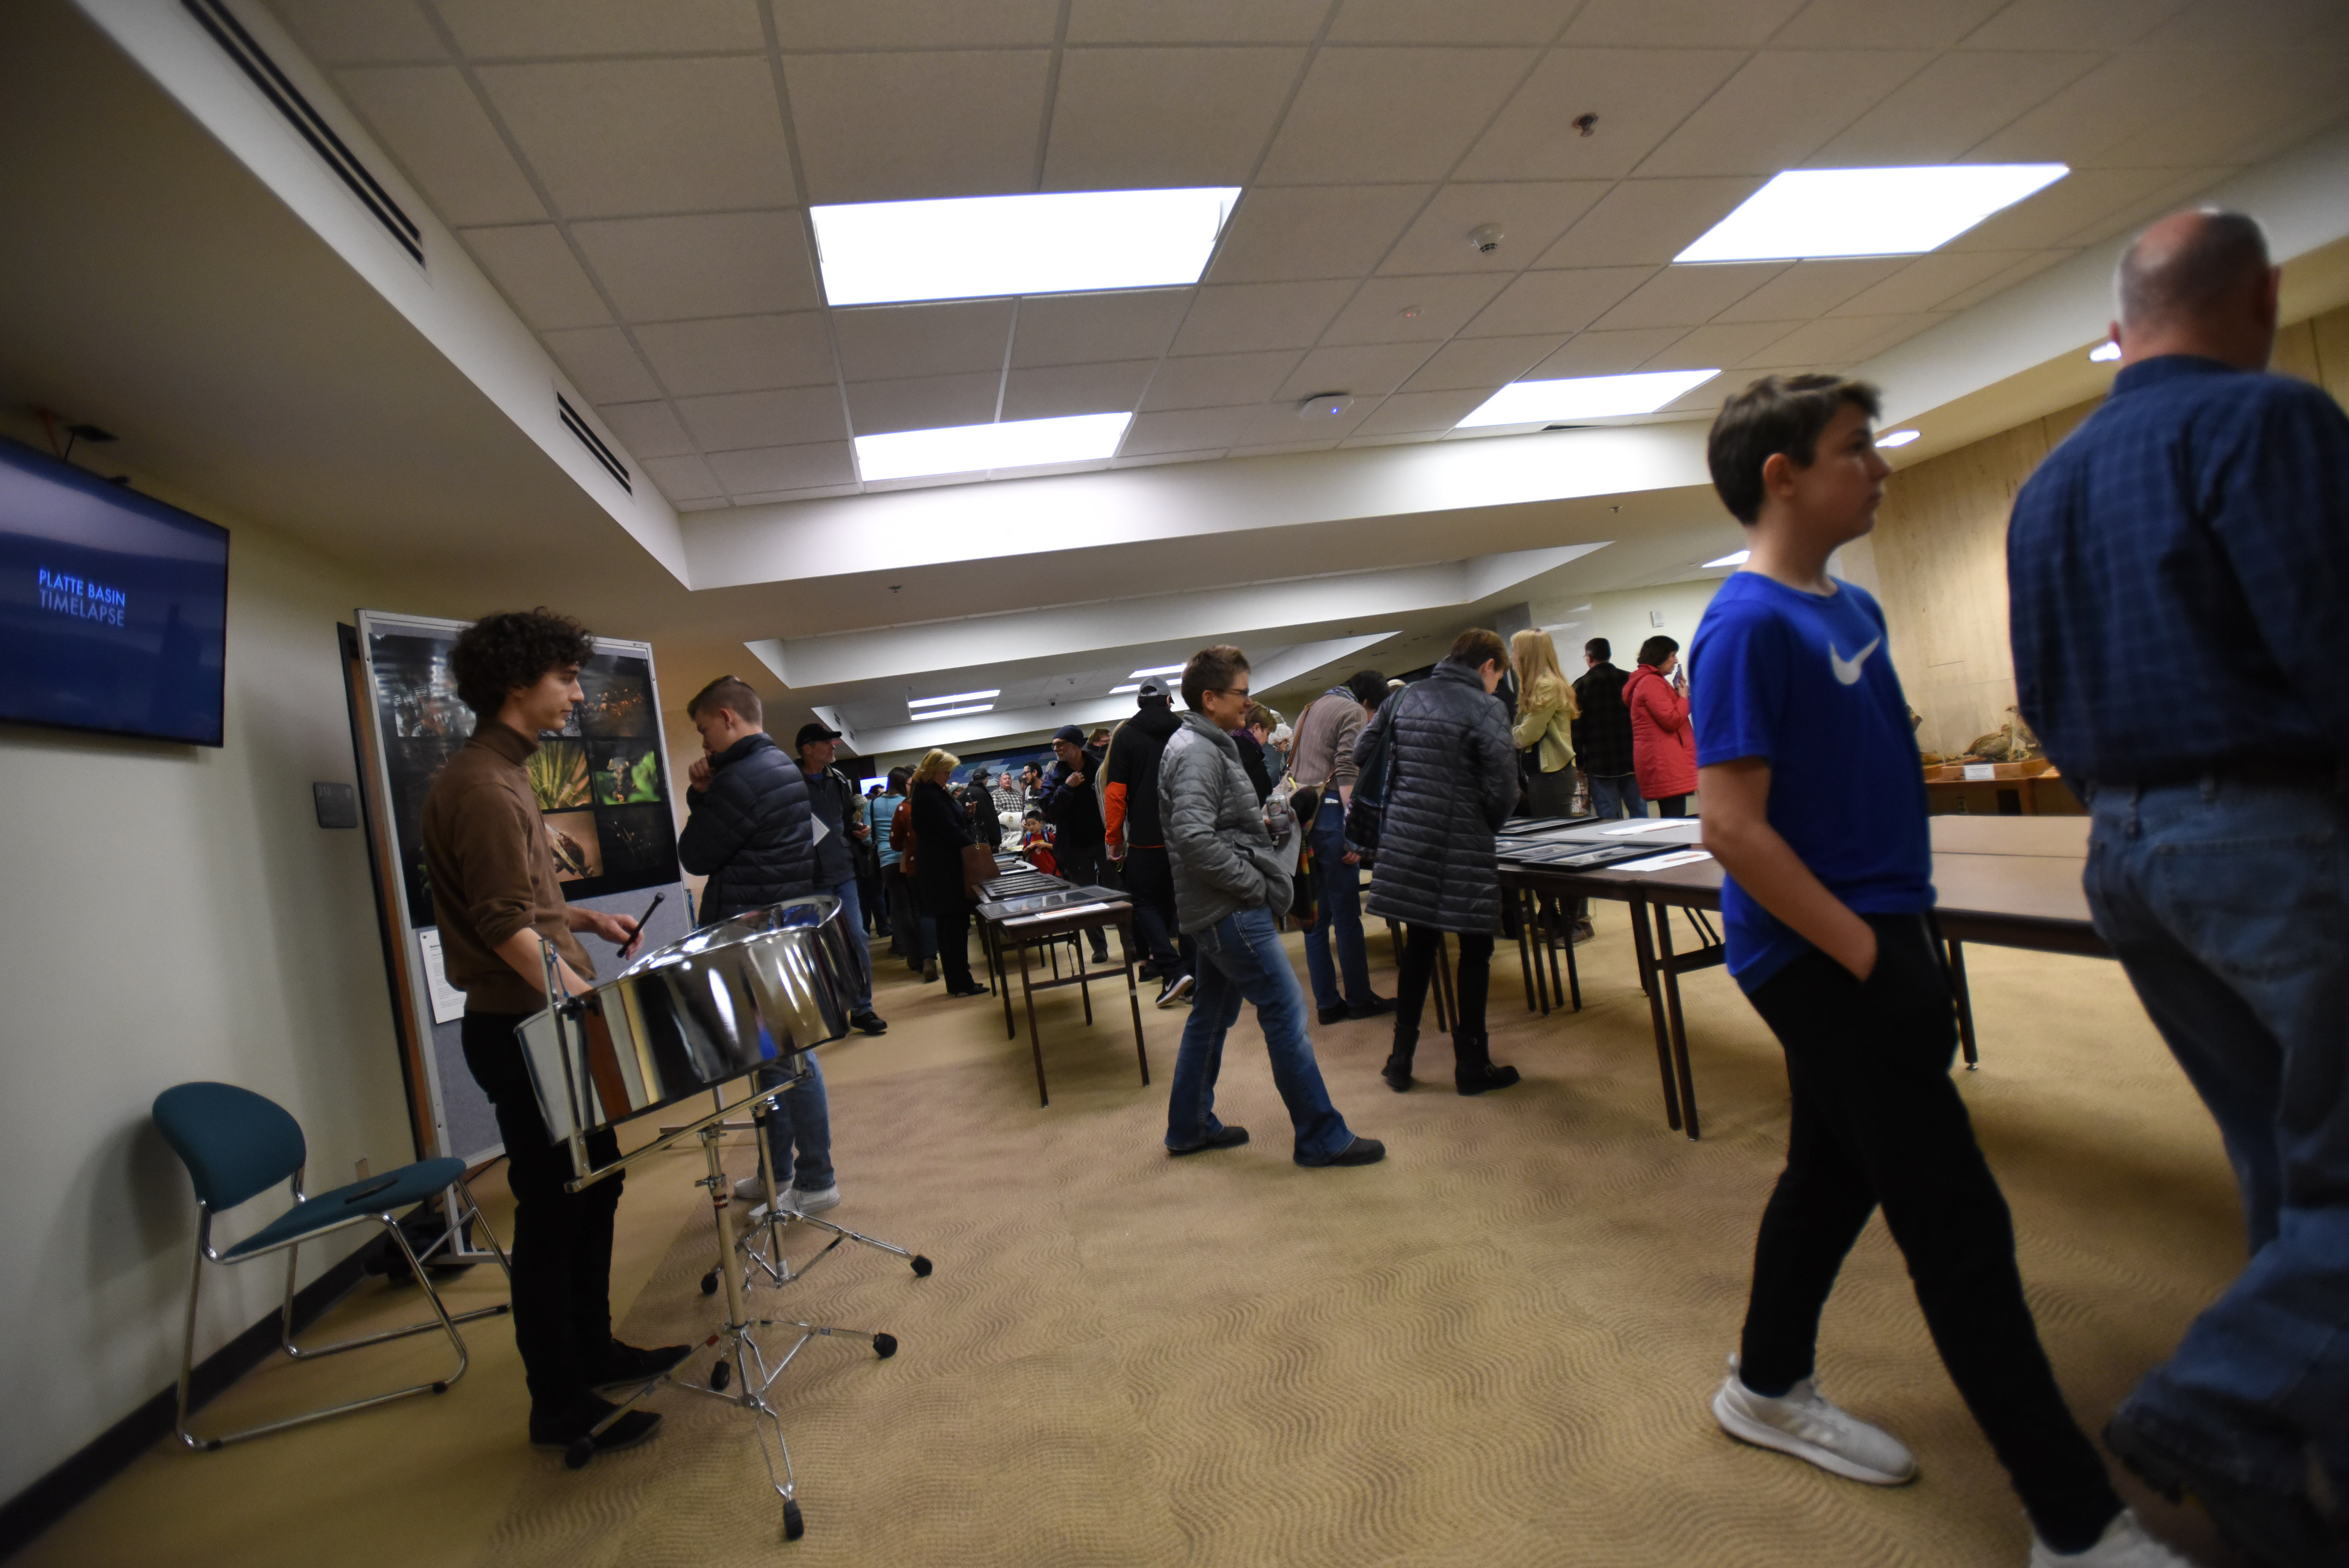 Guests to the Arts for Conservation Night at the School of Natural Resources bid on items Nov. 21, 2019, while listening to Louis Raymond-Kolker play steel drums.